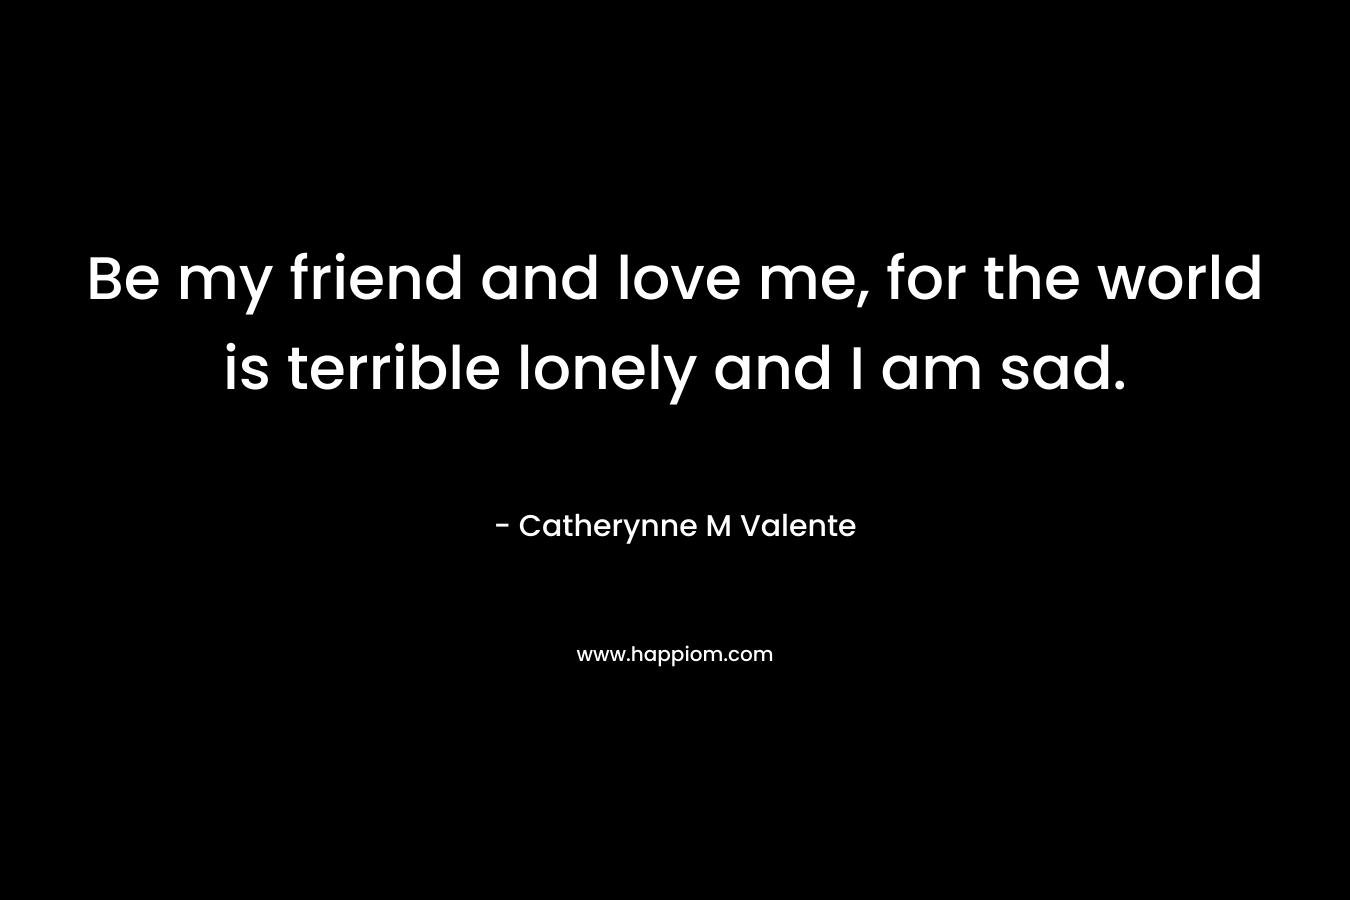 Be my friend and love me, for the world is terrible lonely and I am sad. – Catherynne M Valente